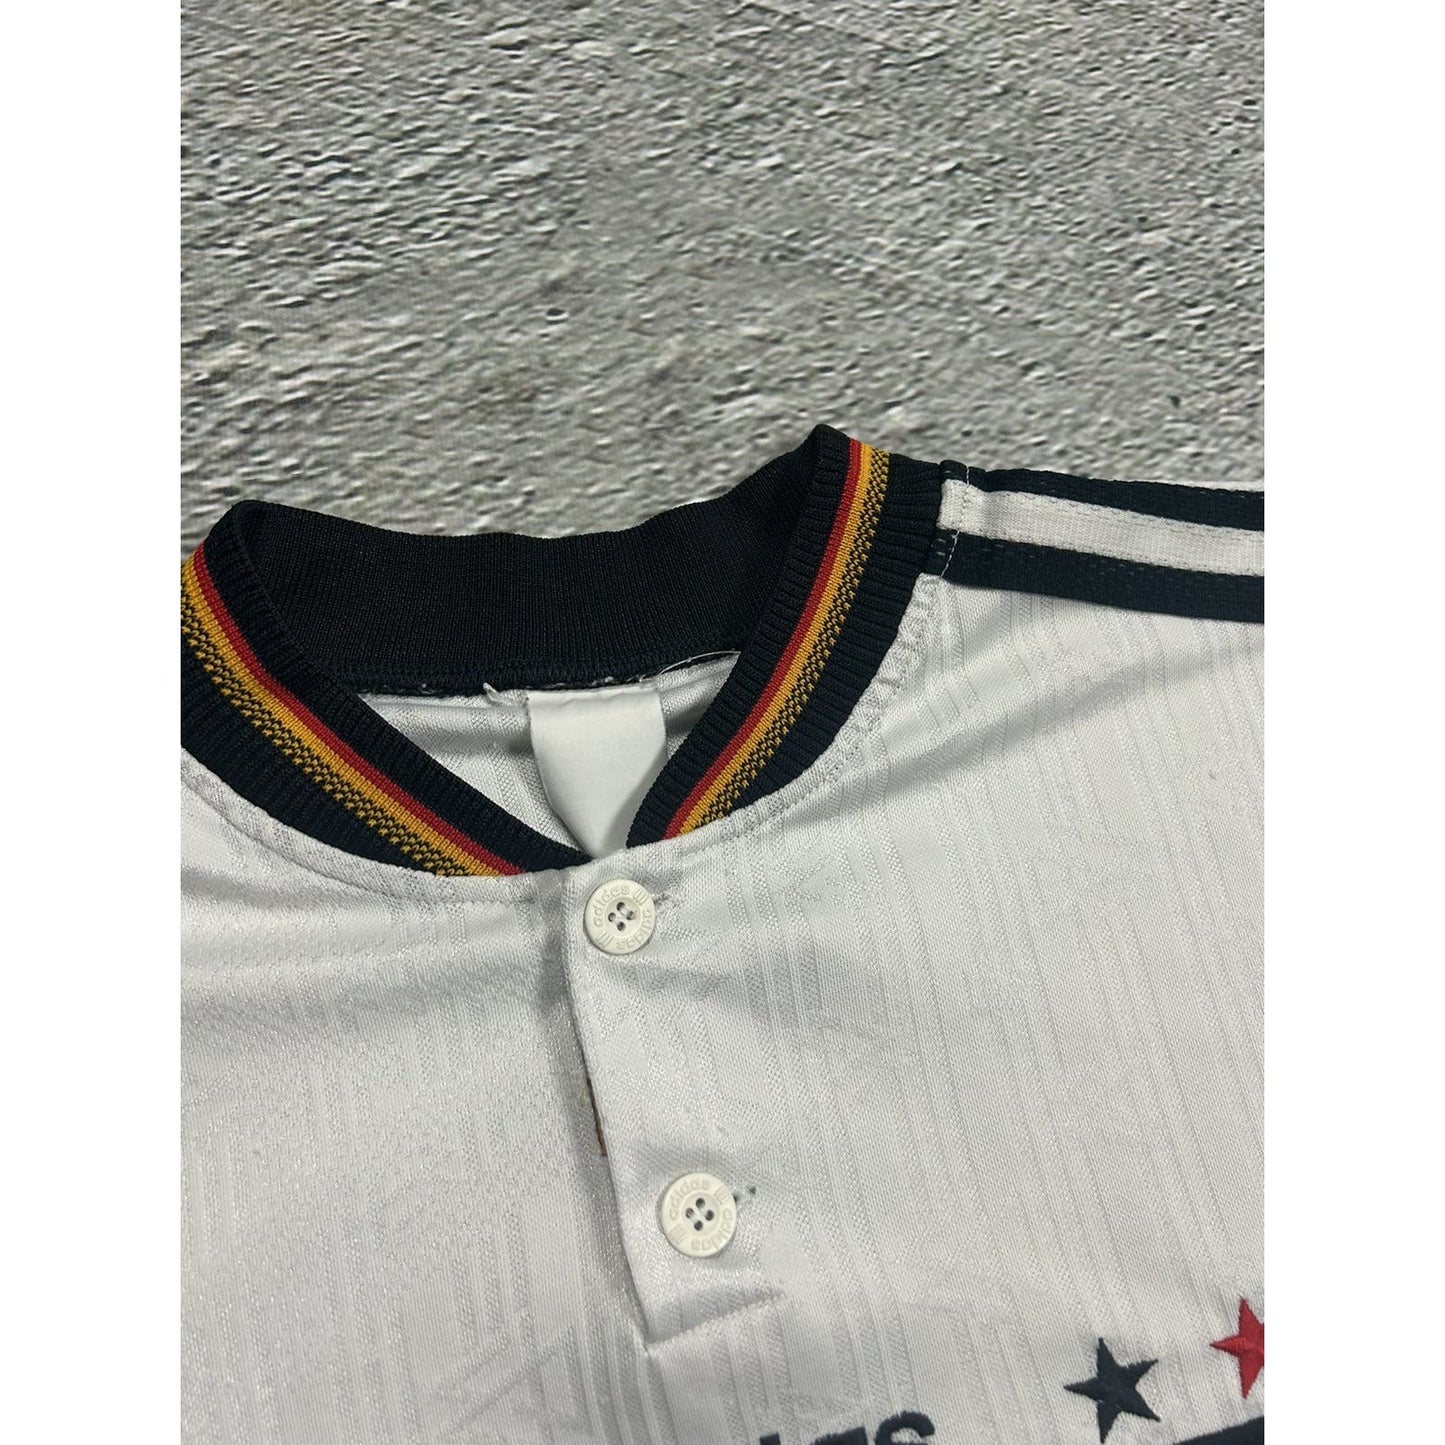 Adidas Germany 1996 jersey re-edition 2006 World Cup vintage